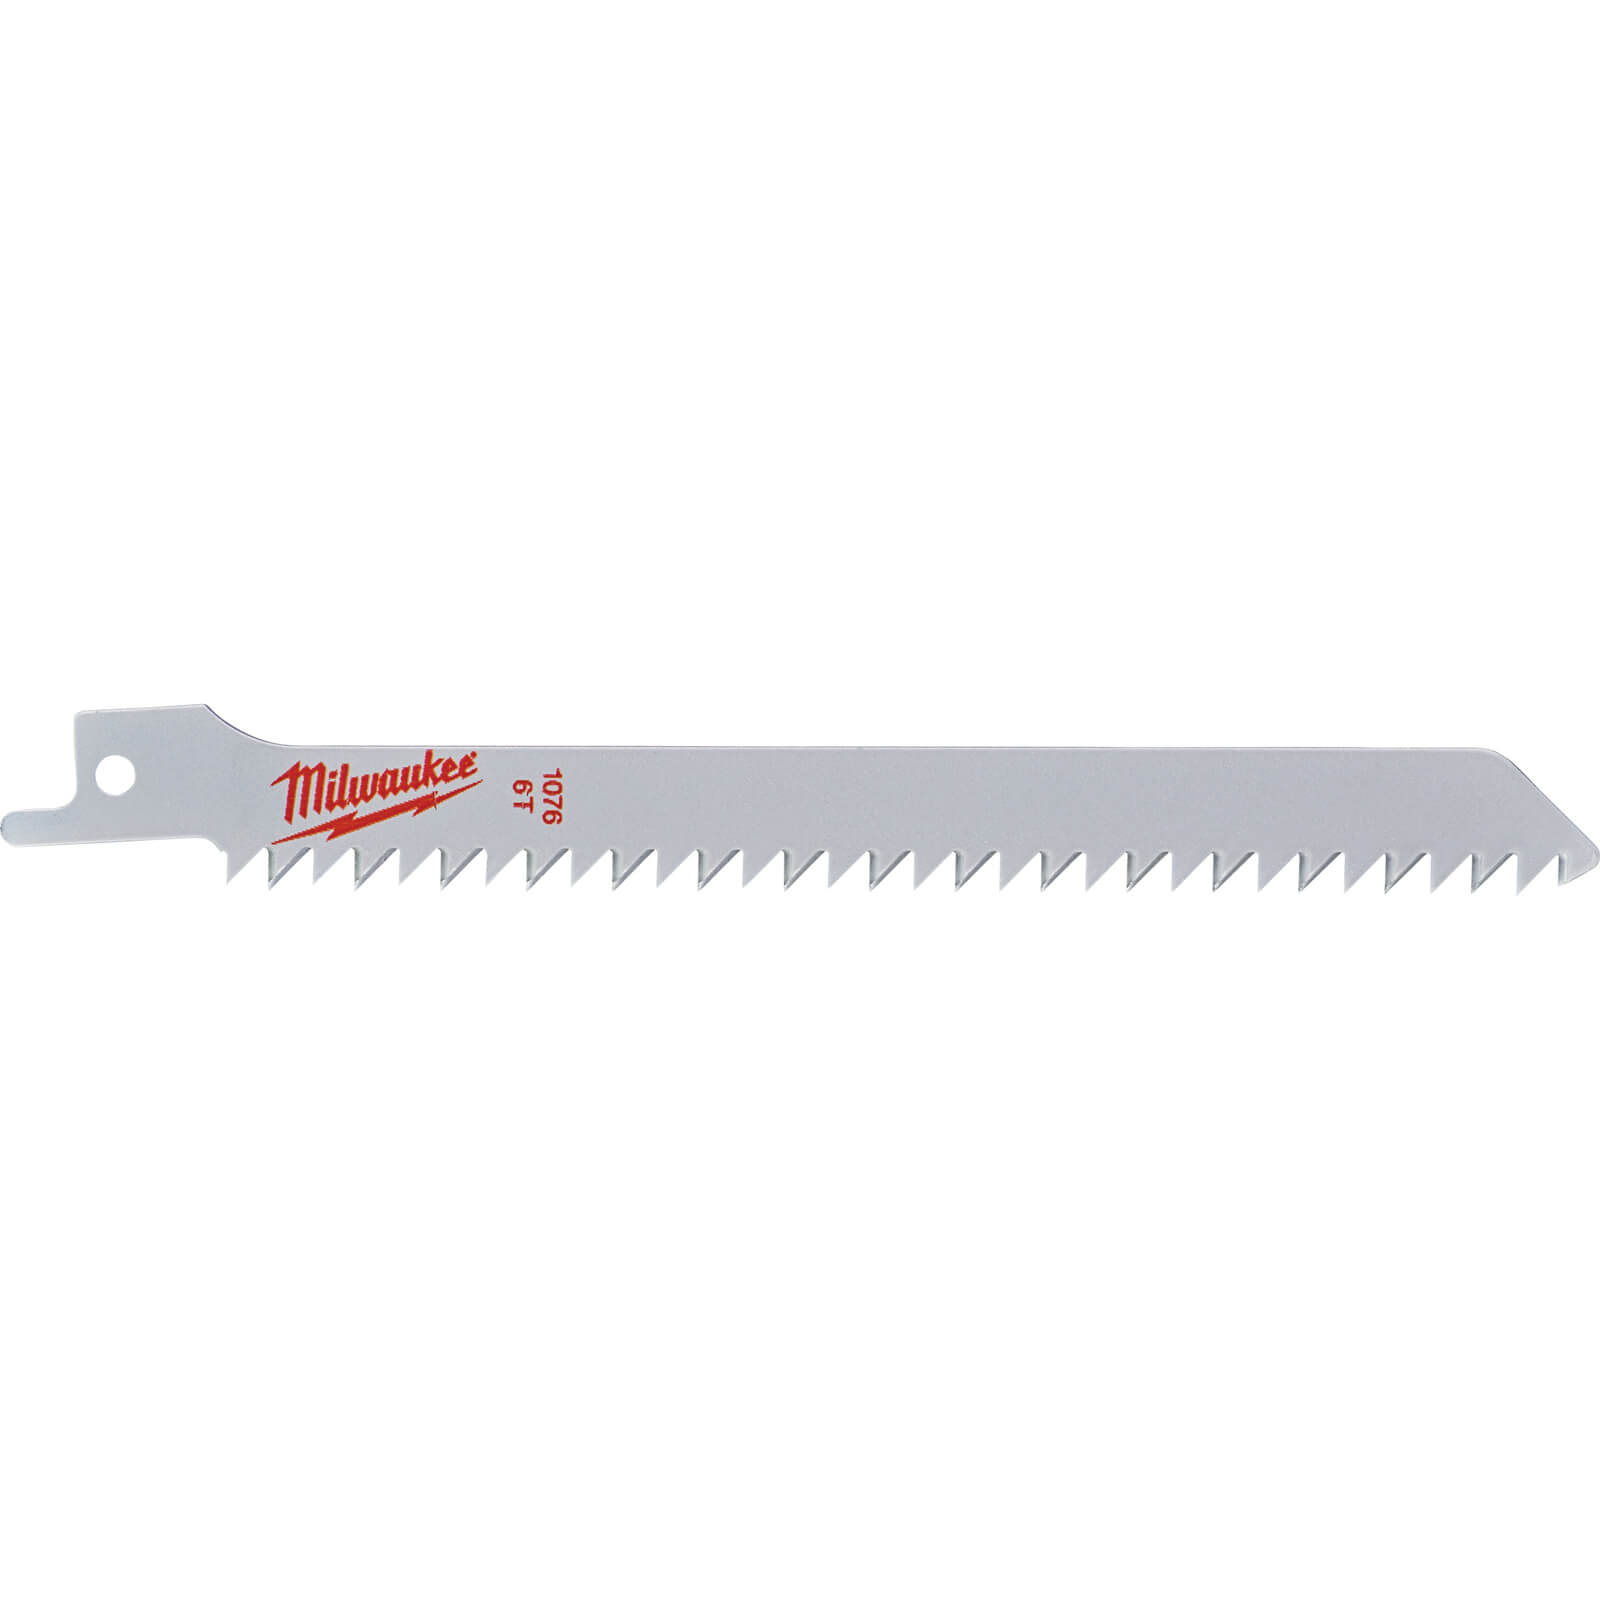 Image of Milwaukee S744D Wood and Plastic Saw Blades 150mm Pack of 3